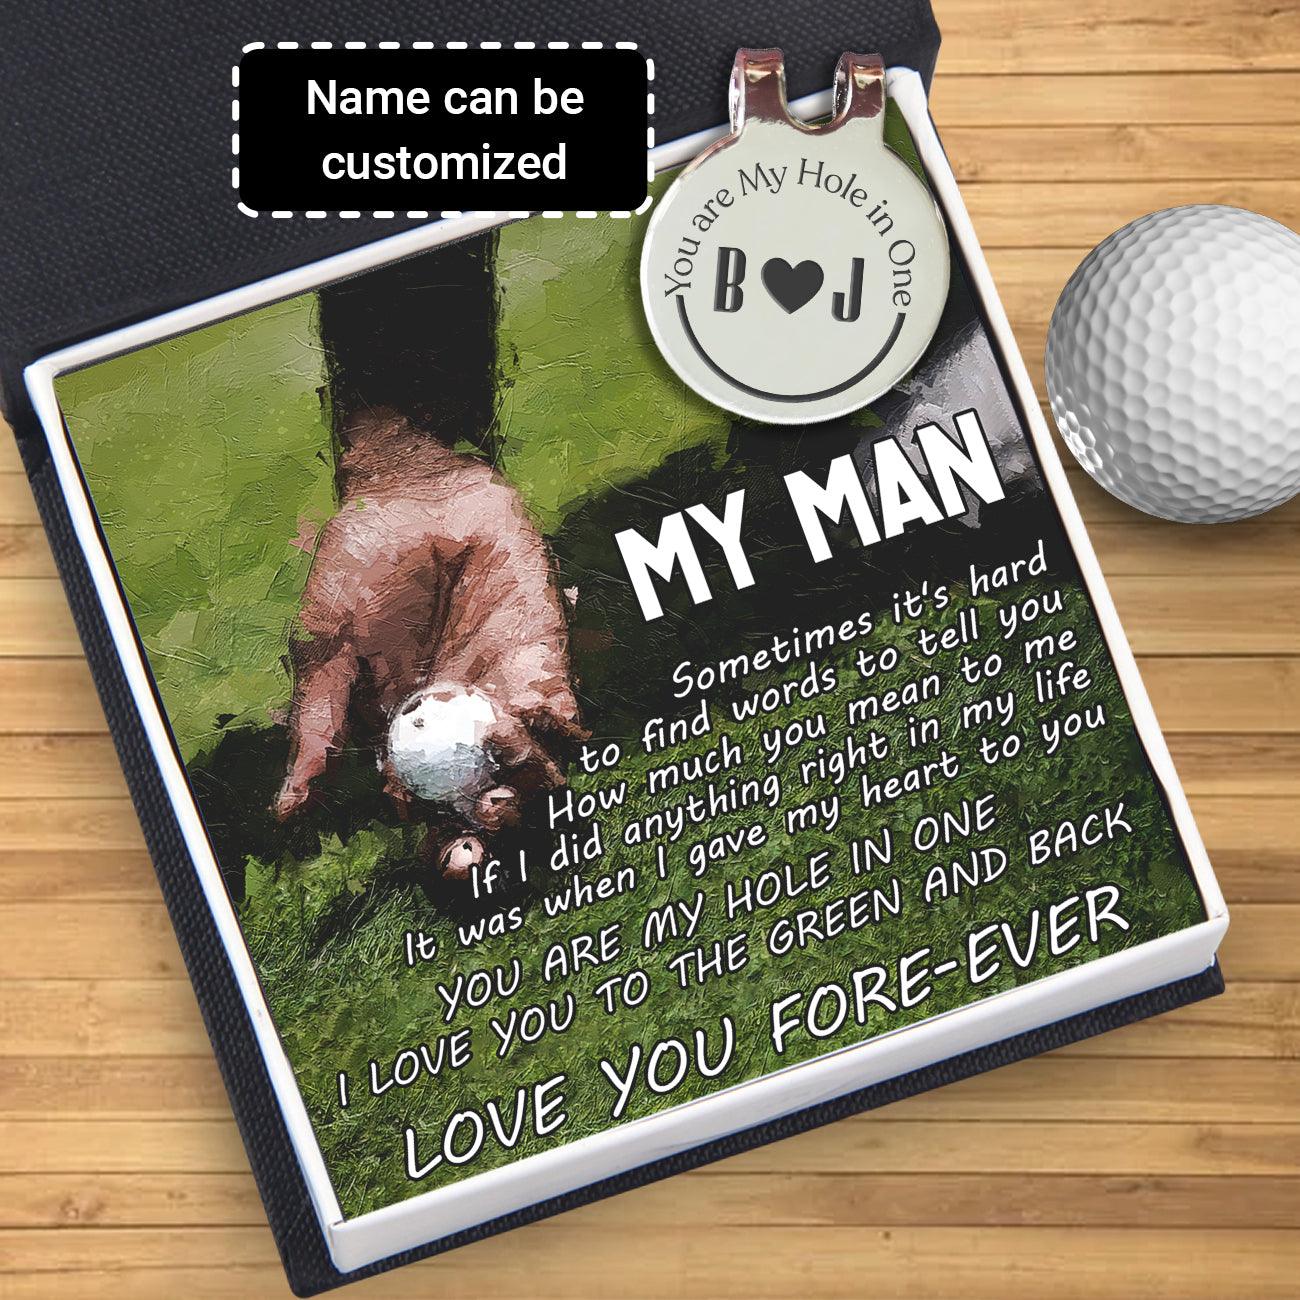 Personalised Golf Marker - Golf - To My Man - My Hole In One - Augata26001 - Gifts Holder